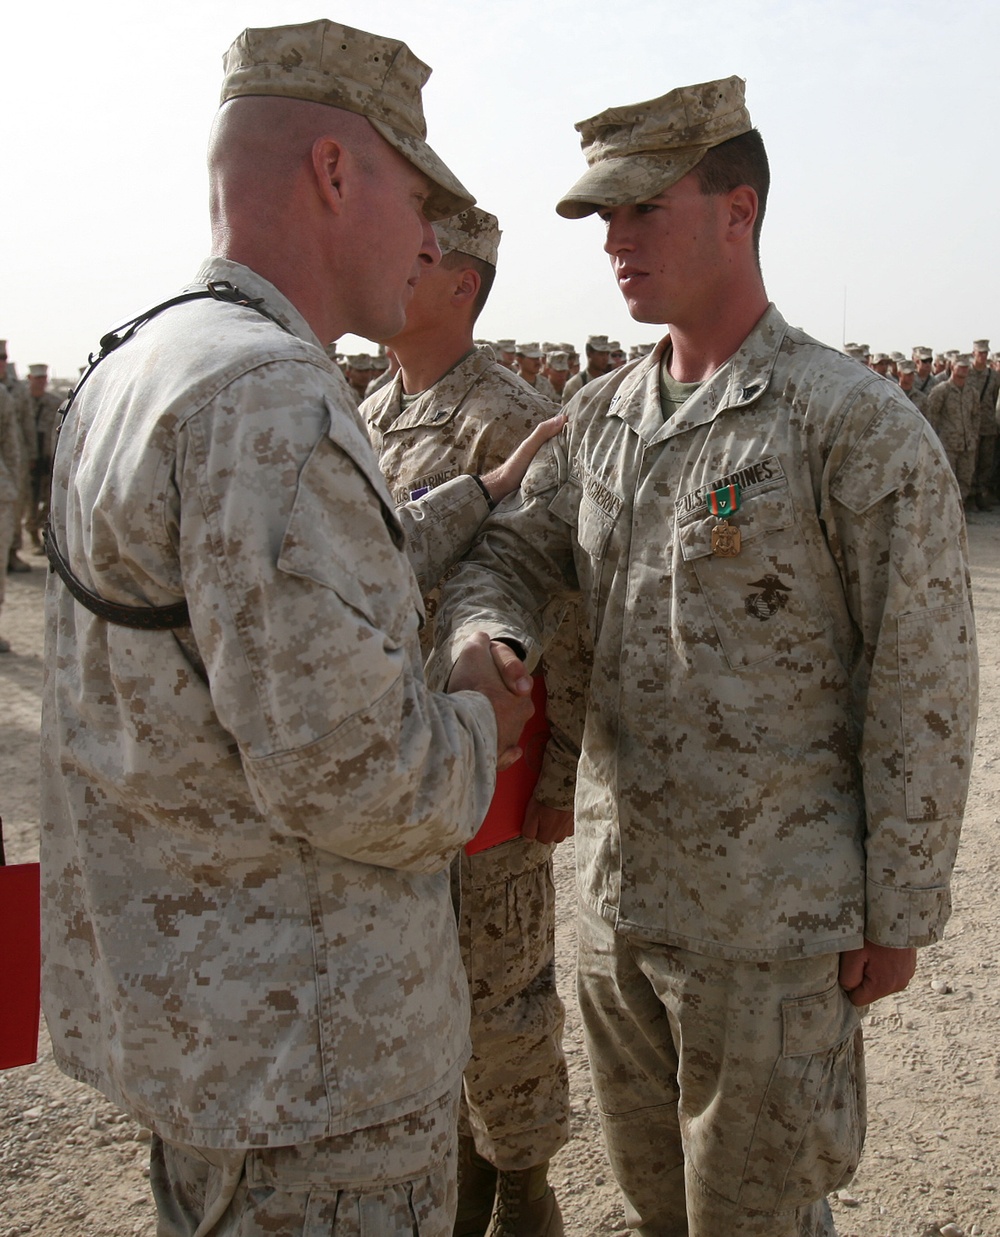 North Attleboro, Mass. Marine awarded for valor in Afghanistan